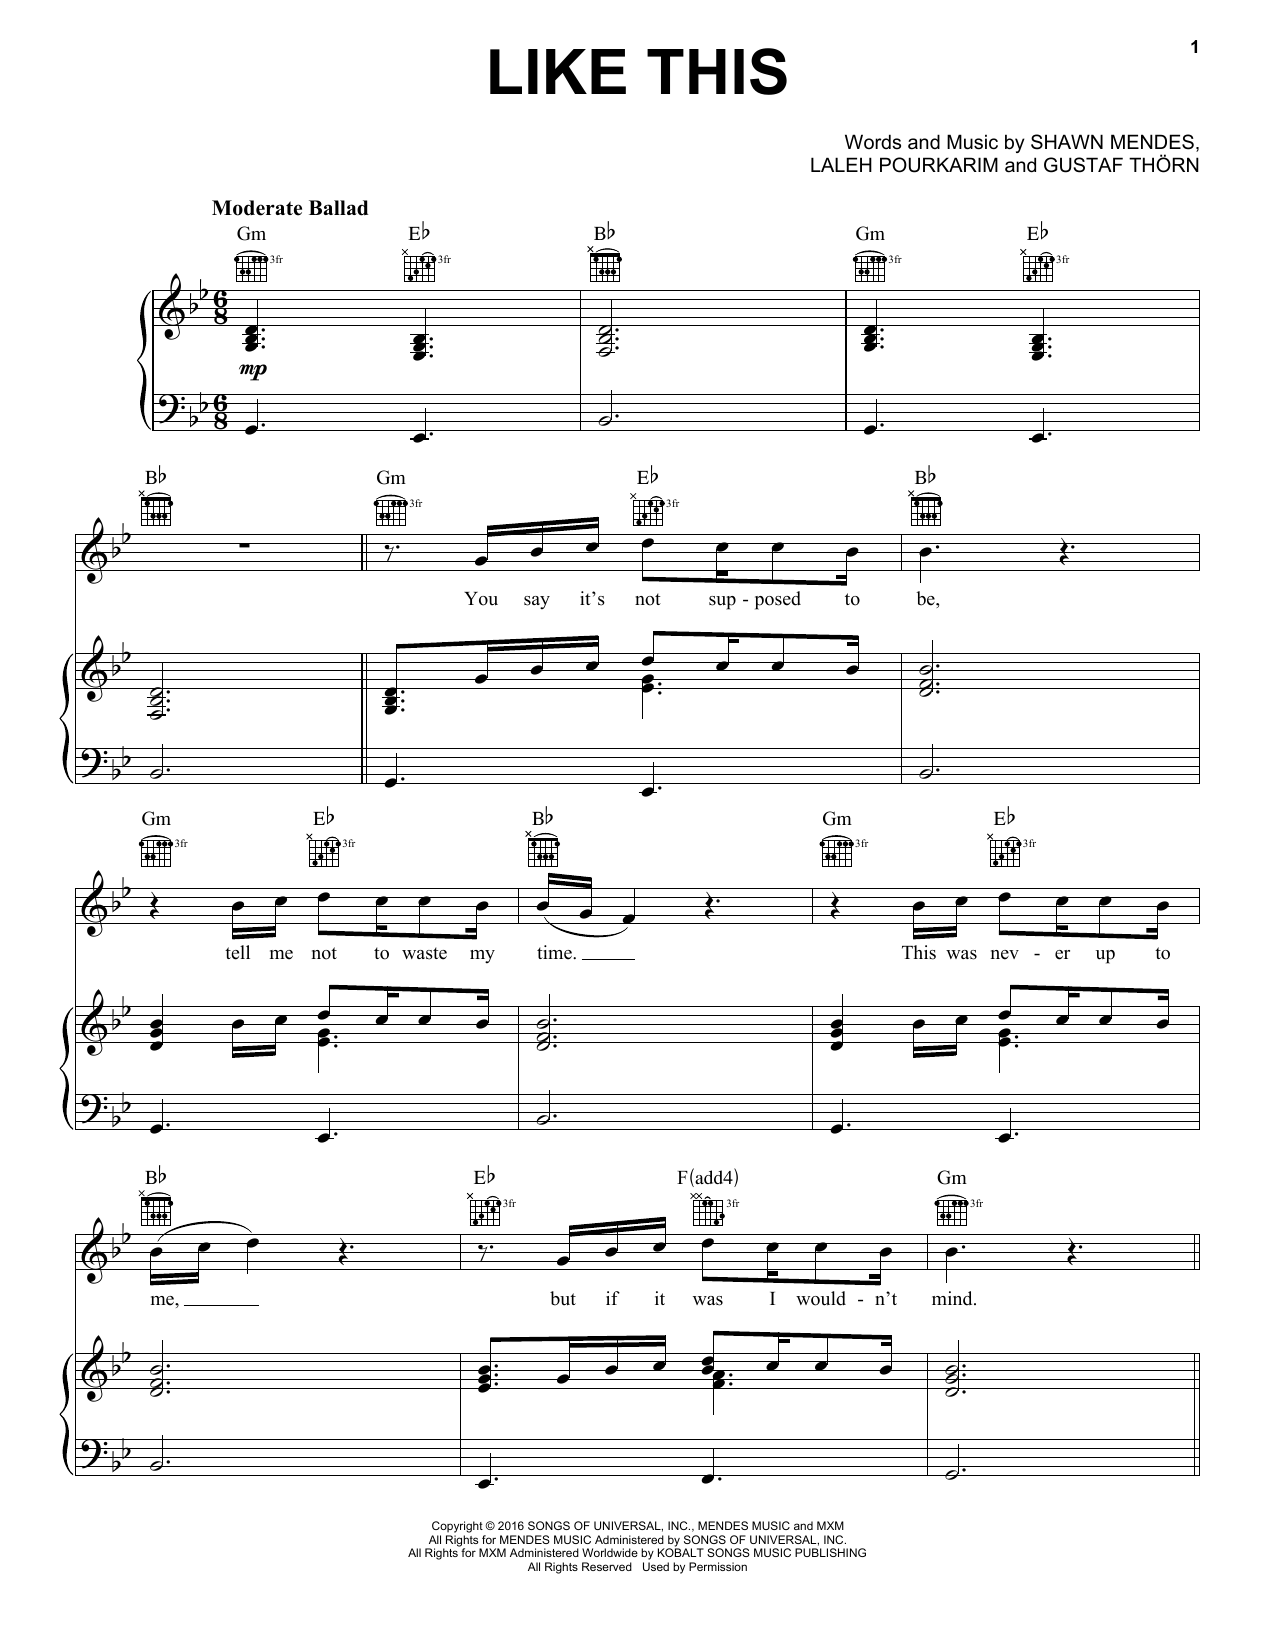 Download Shawn Mendes Like This Sheet Music